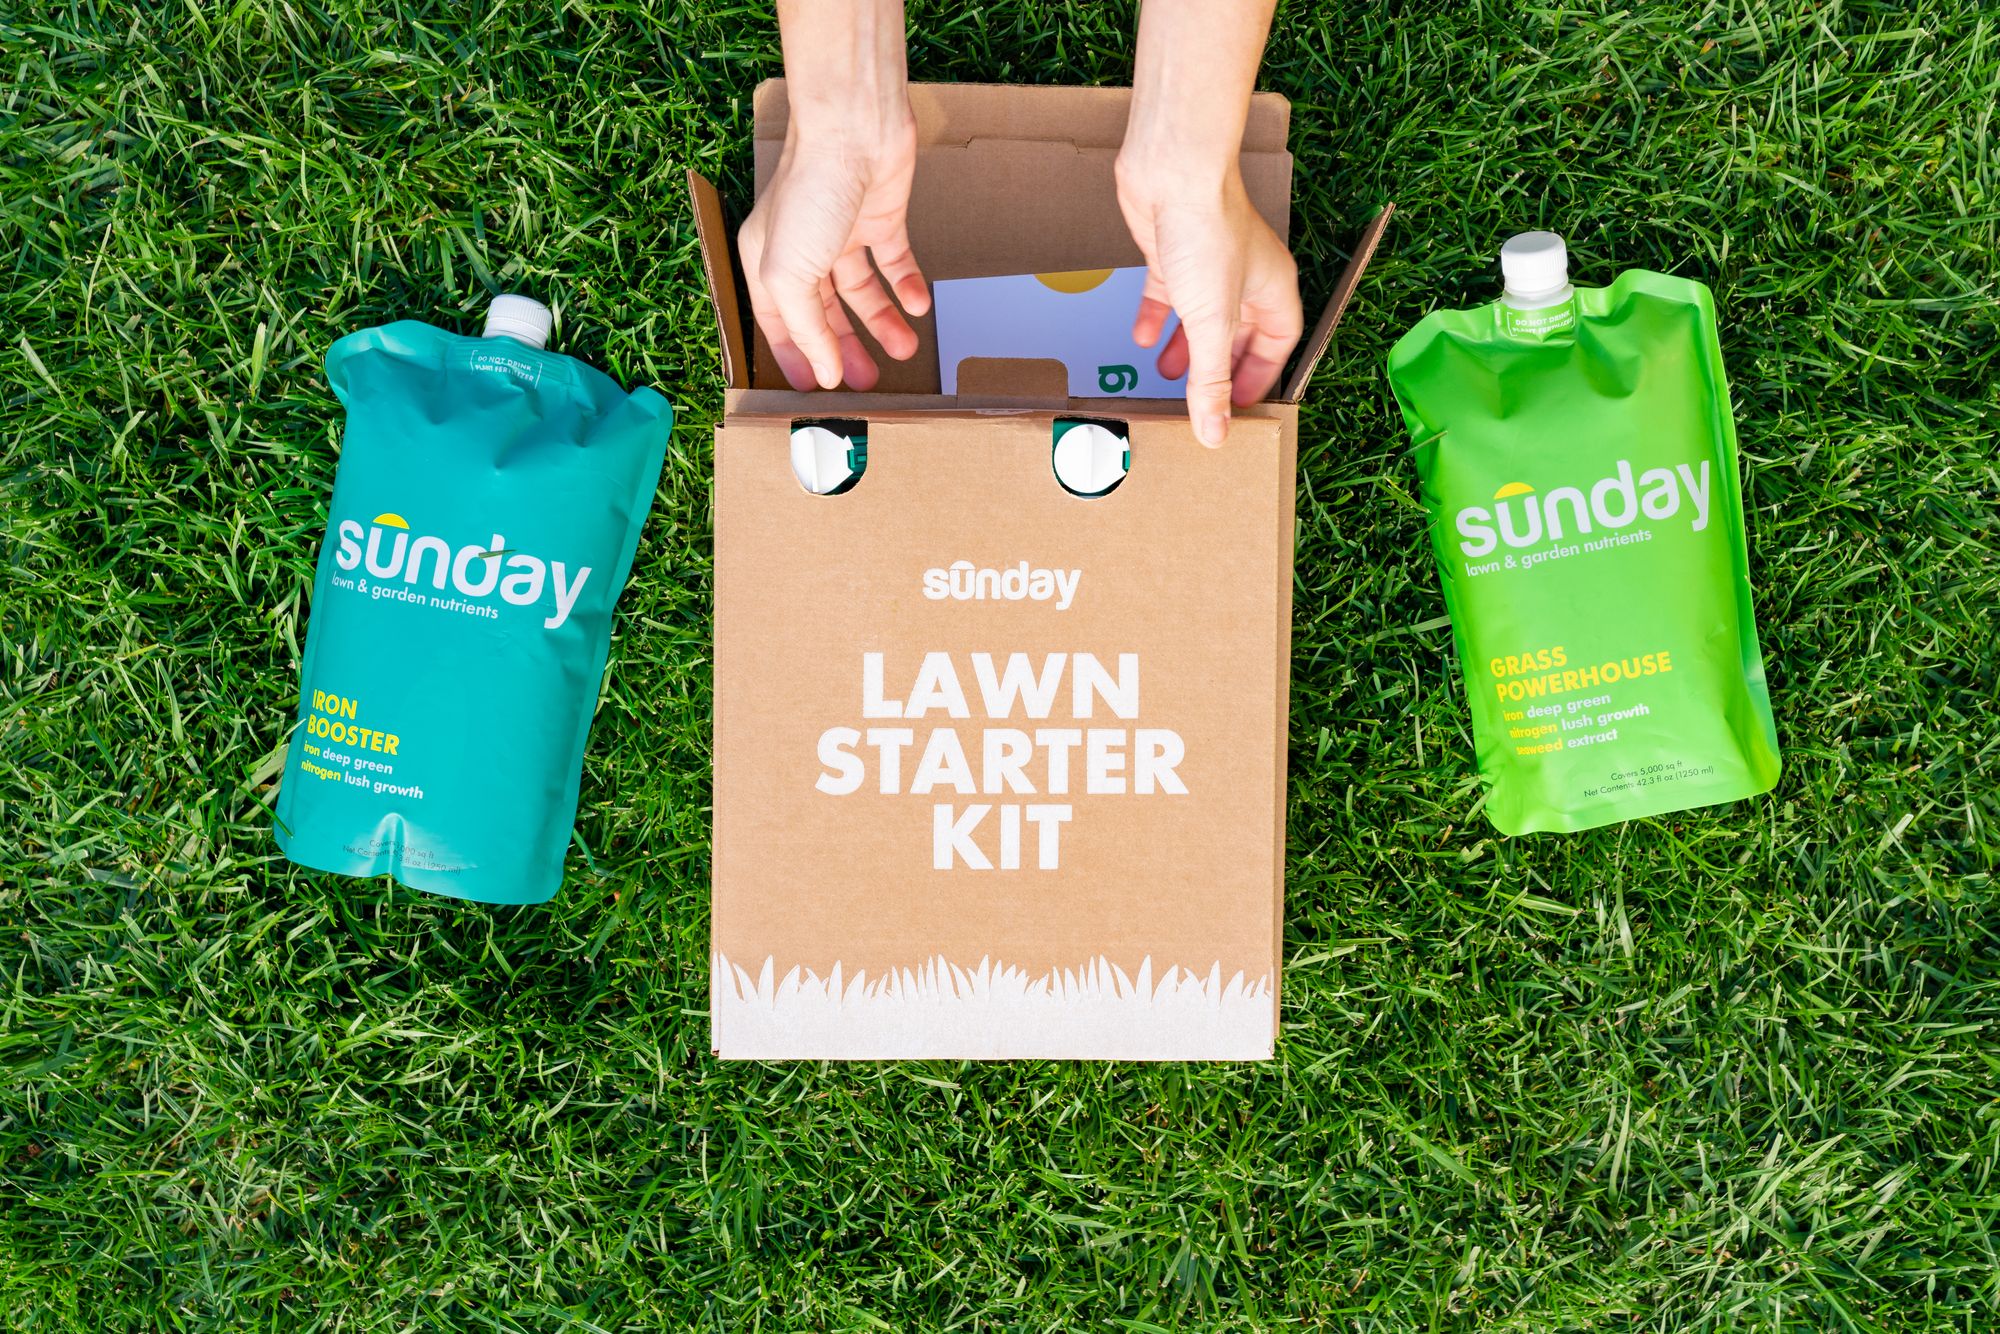 6 Reasons You Need To Try Sunday's Lawn Care Program This Spring